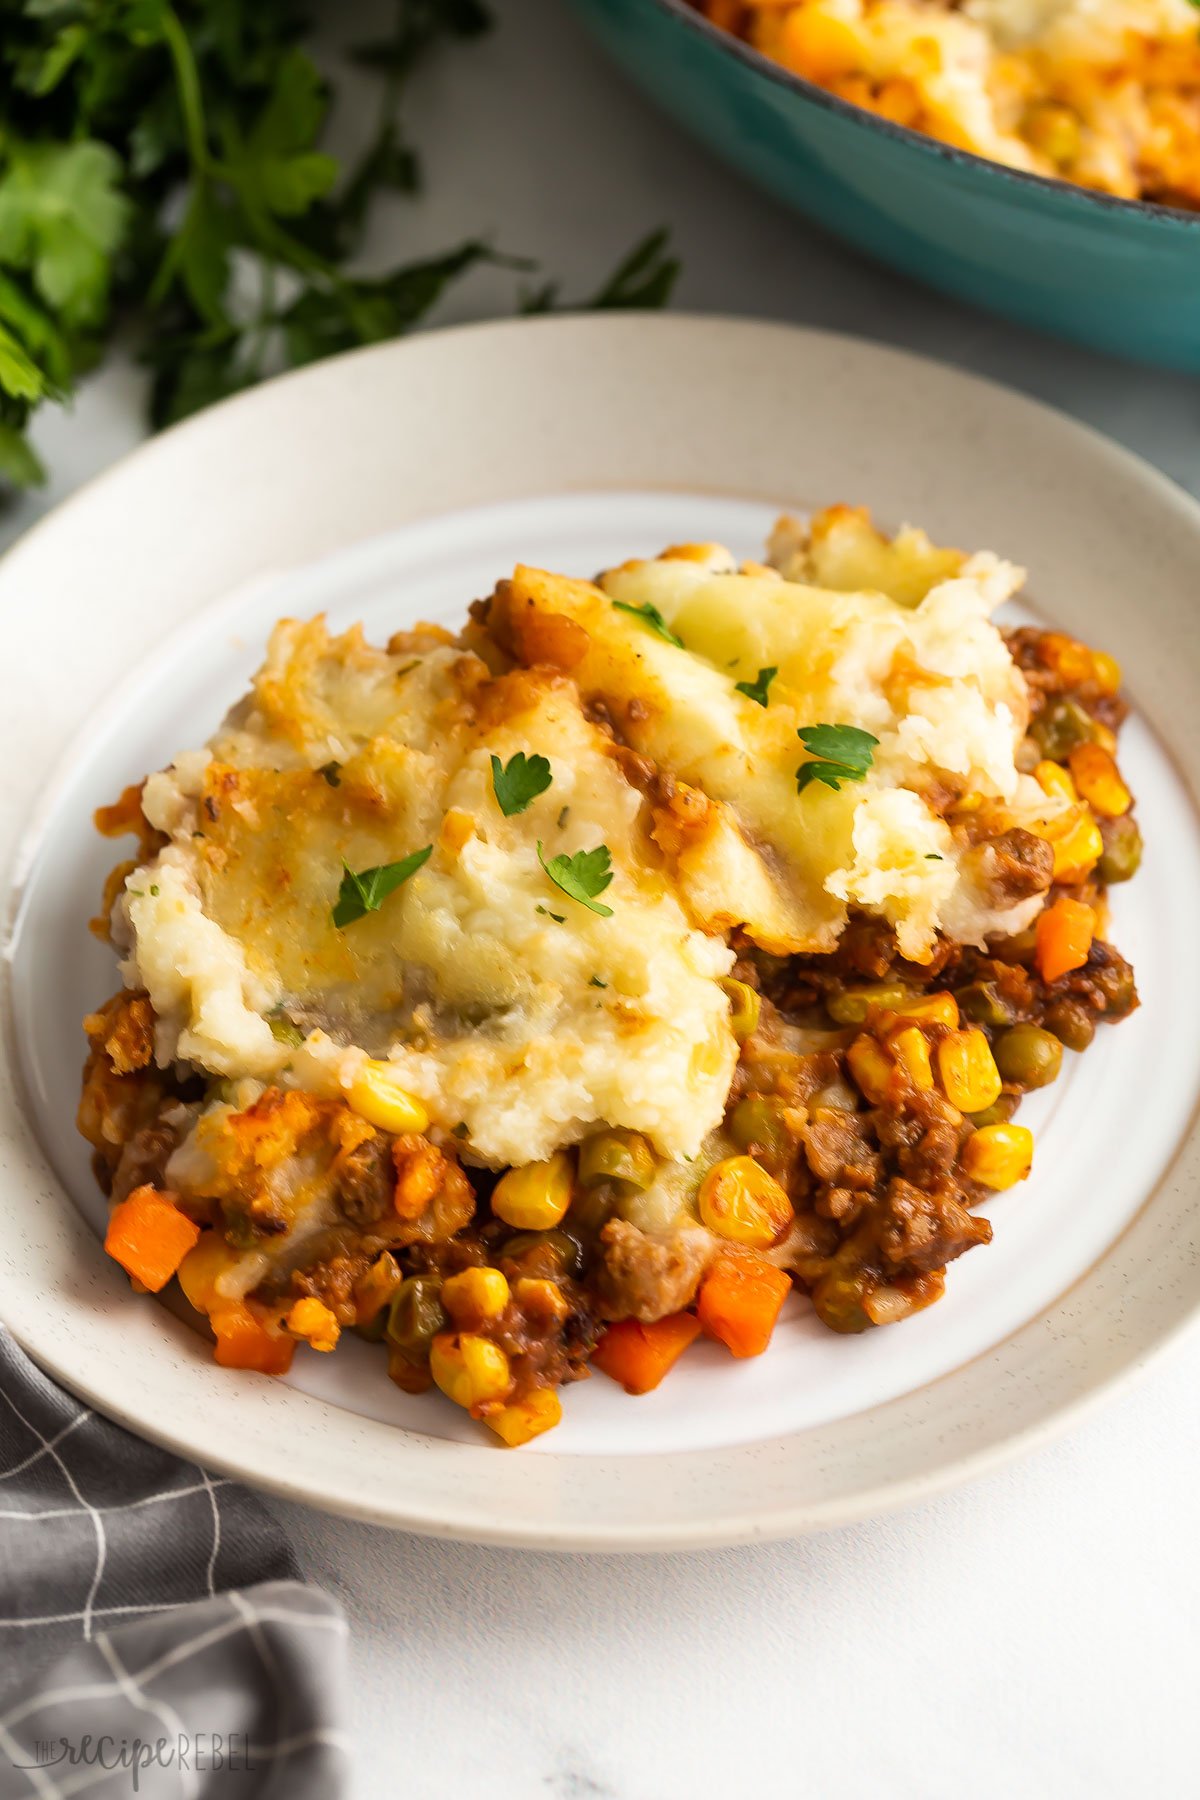 shepherds pie on a plate with a sprinkle of parsley.